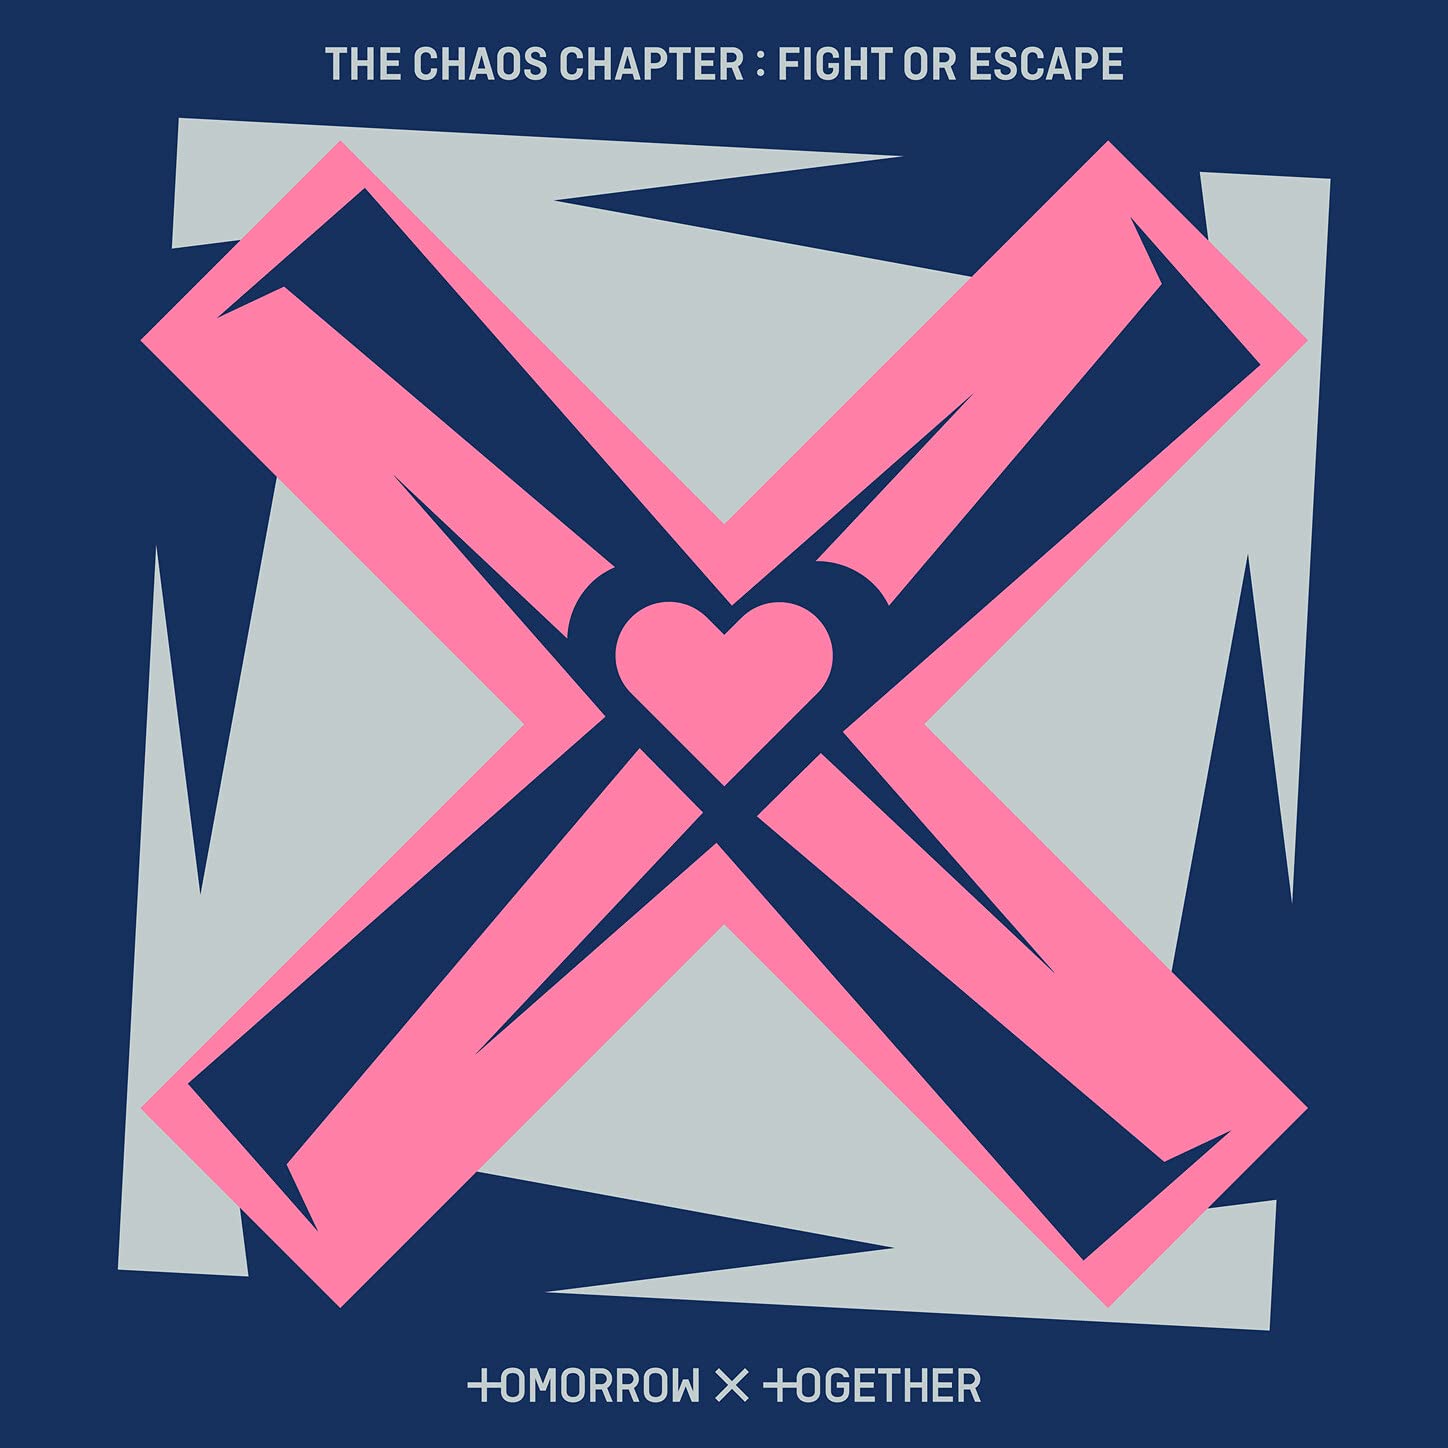 Tomorrow-X-Together-Txt-Chaos-Chapter-Fight-or-Escape